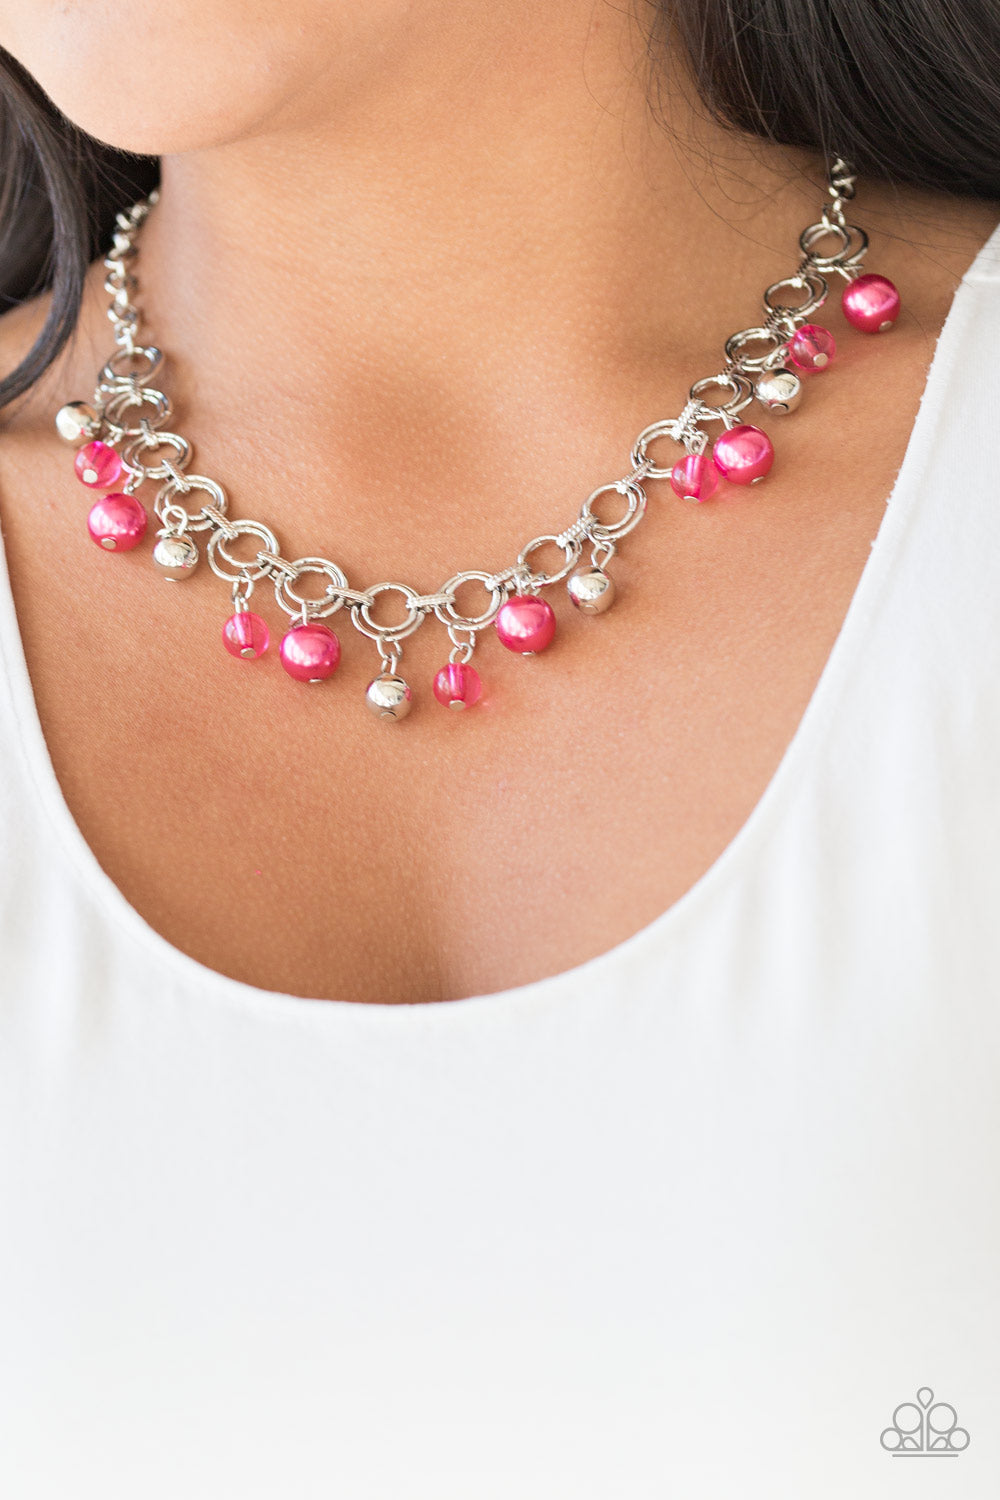 Fiercely Fancy- Pink and Silver Necklace- Paparazzi Accessories